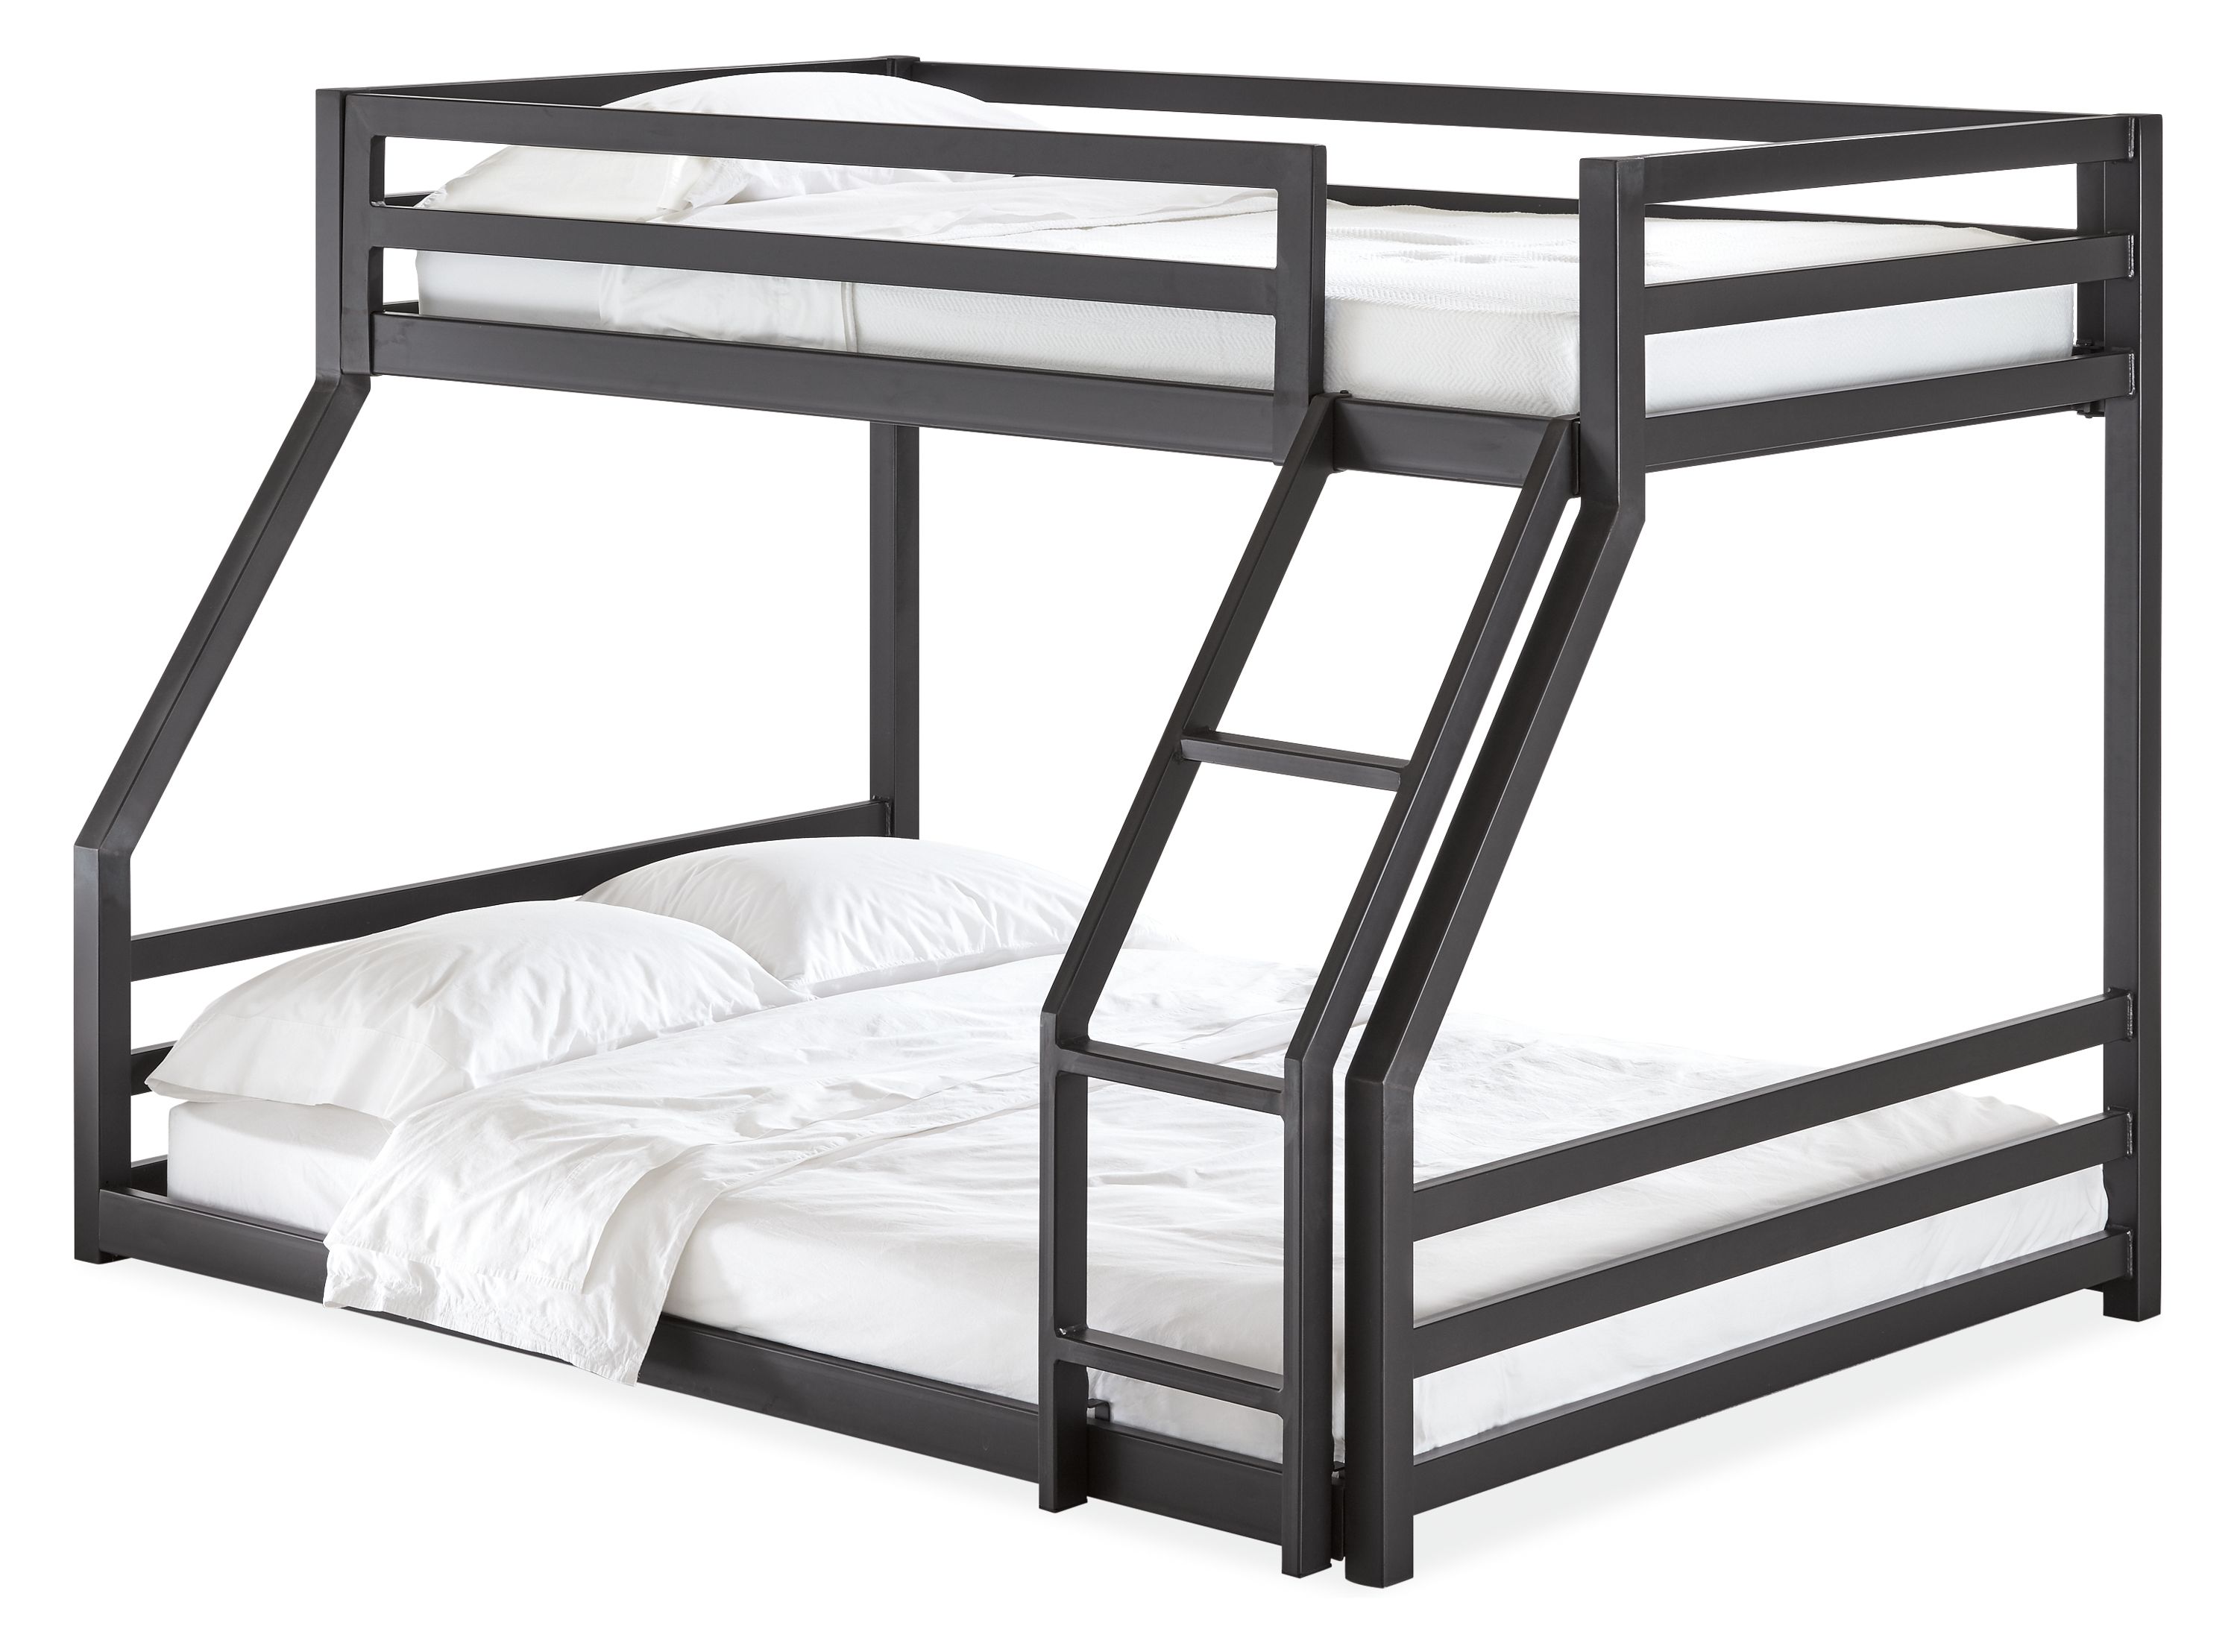 Fort Bunk Beds Modern Kids Furniture, Full Size Bunk Beds That Come Apart